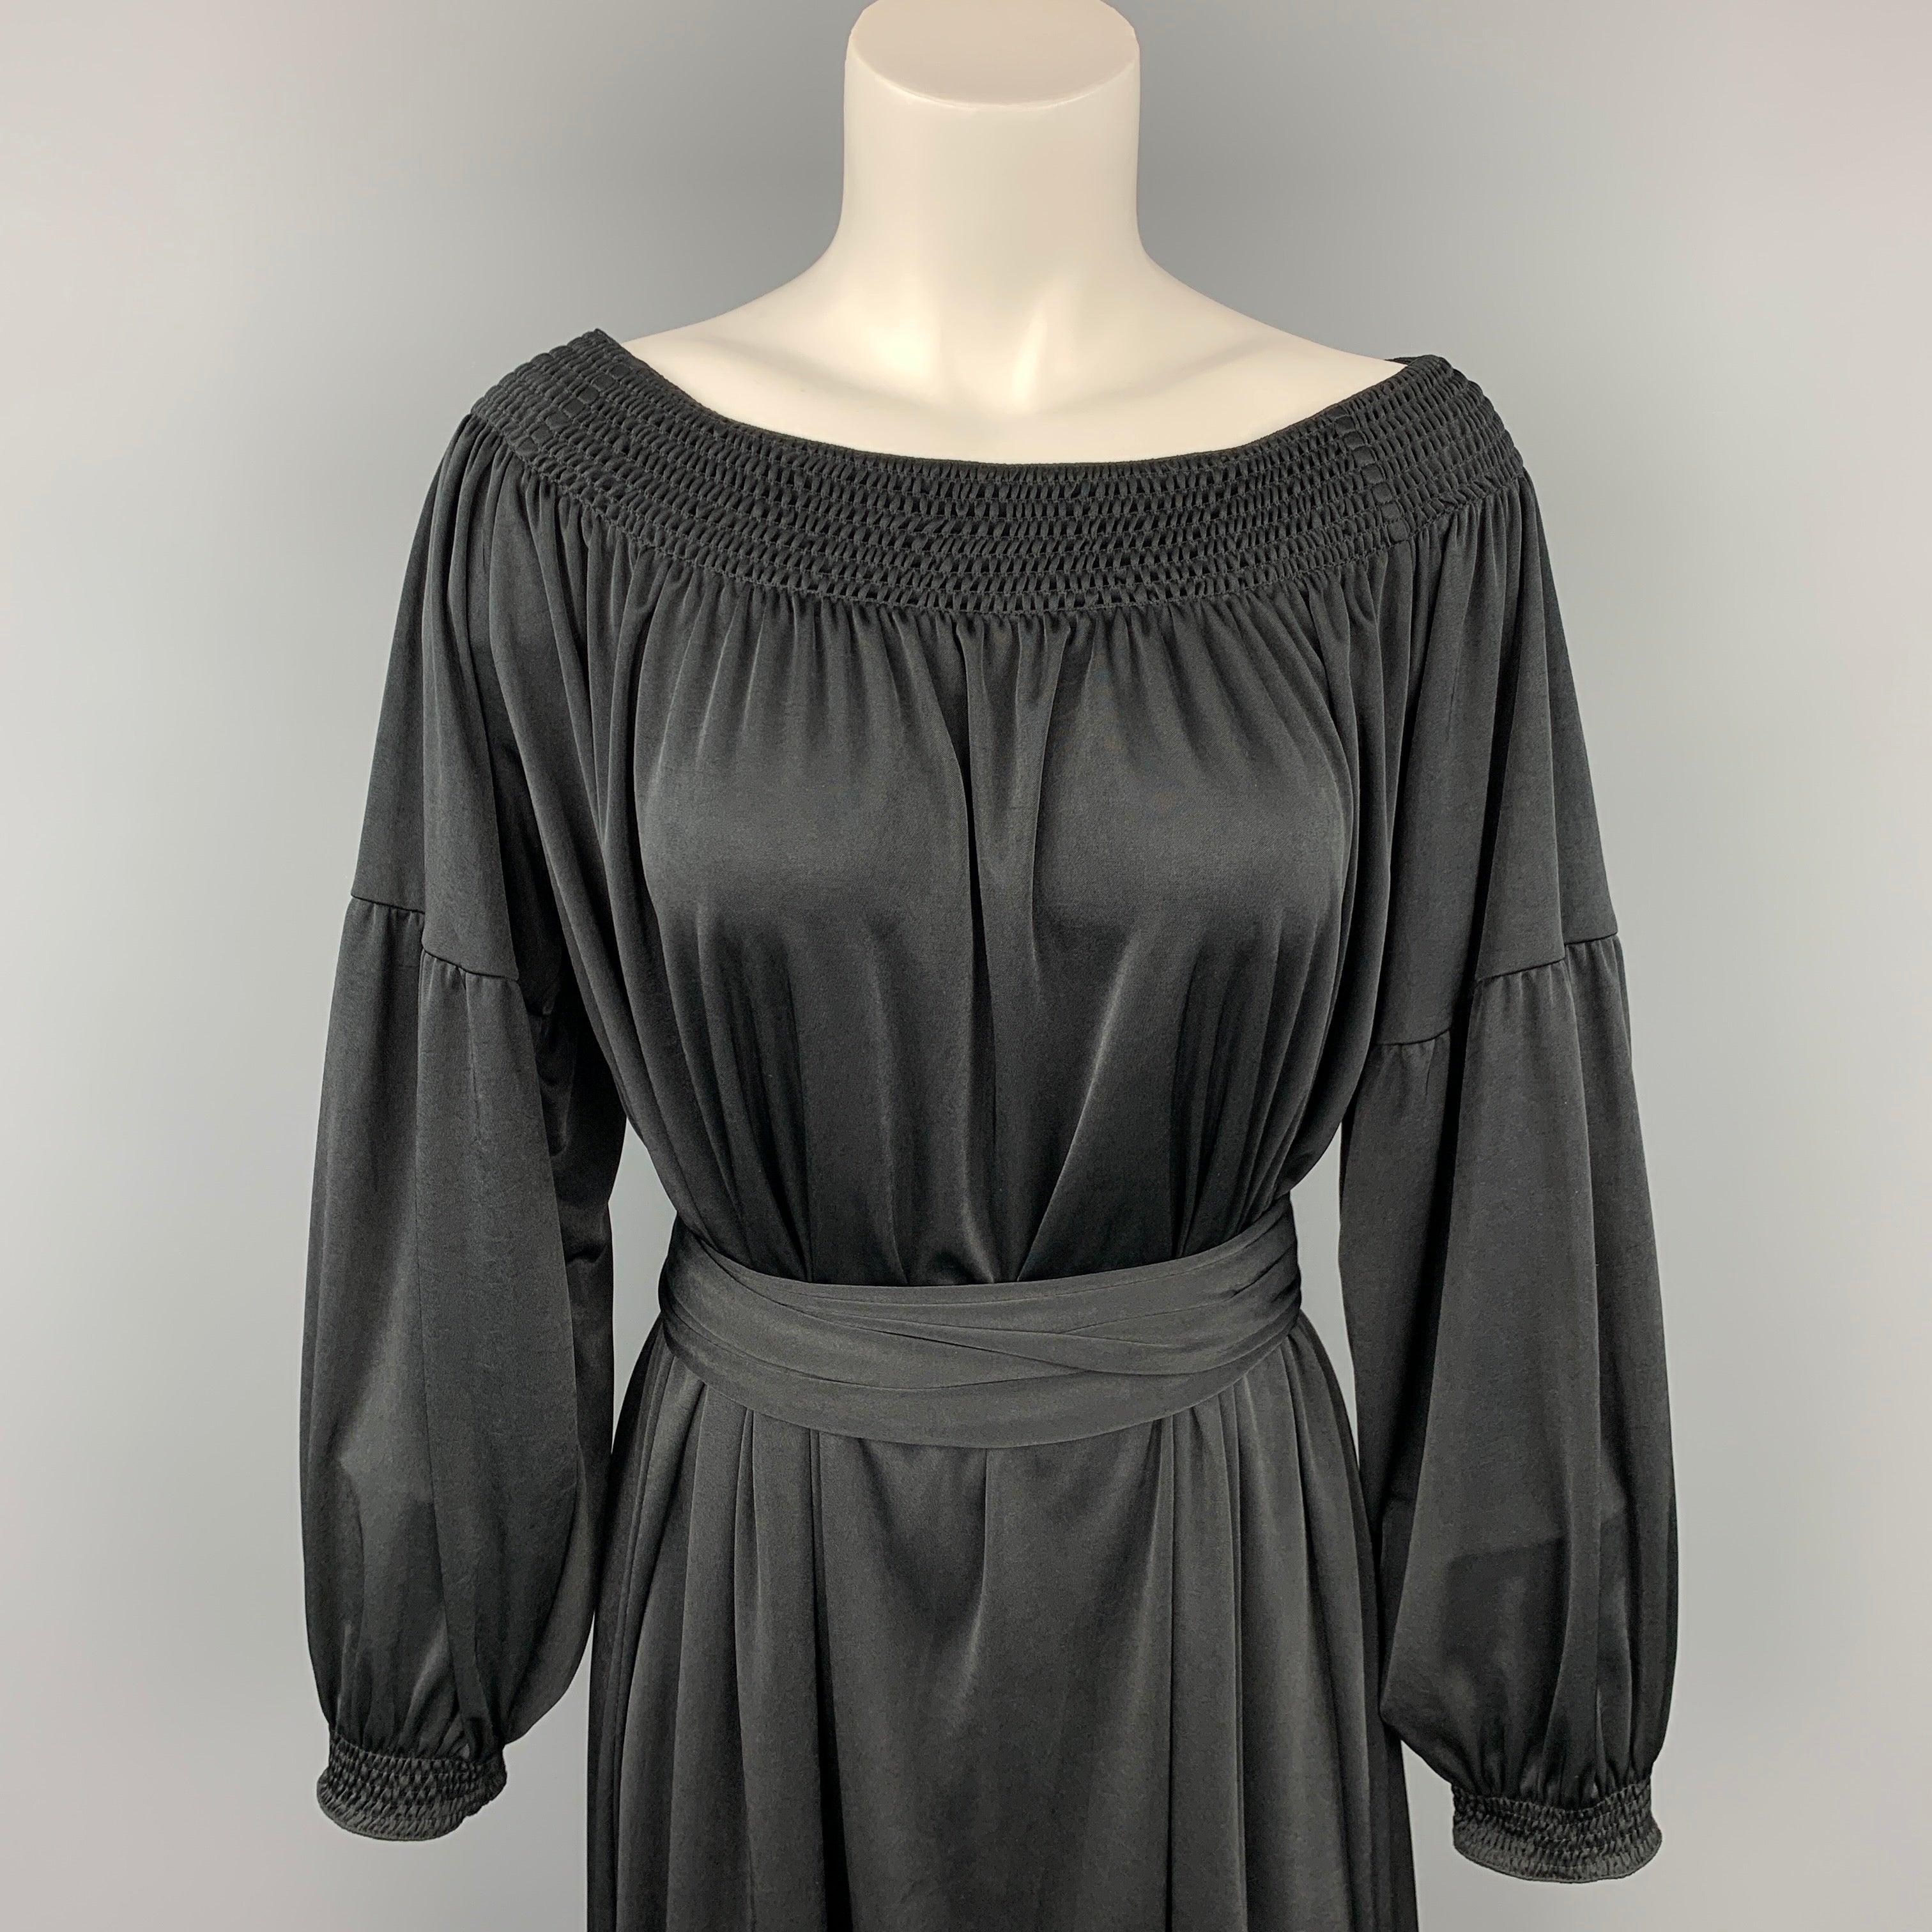 PRADA dress comes in a black jersey polyester featuring a bohemian style, belted, and 3/4 sleeves. Made in Italy.Very Good
Pre-Owned Condition. 

Marked:   S 

Measurements: 
 
Shoulder: 17 inches  Bust: 42 inches  Hip: 58 inches Sleeve: 14.5 inches